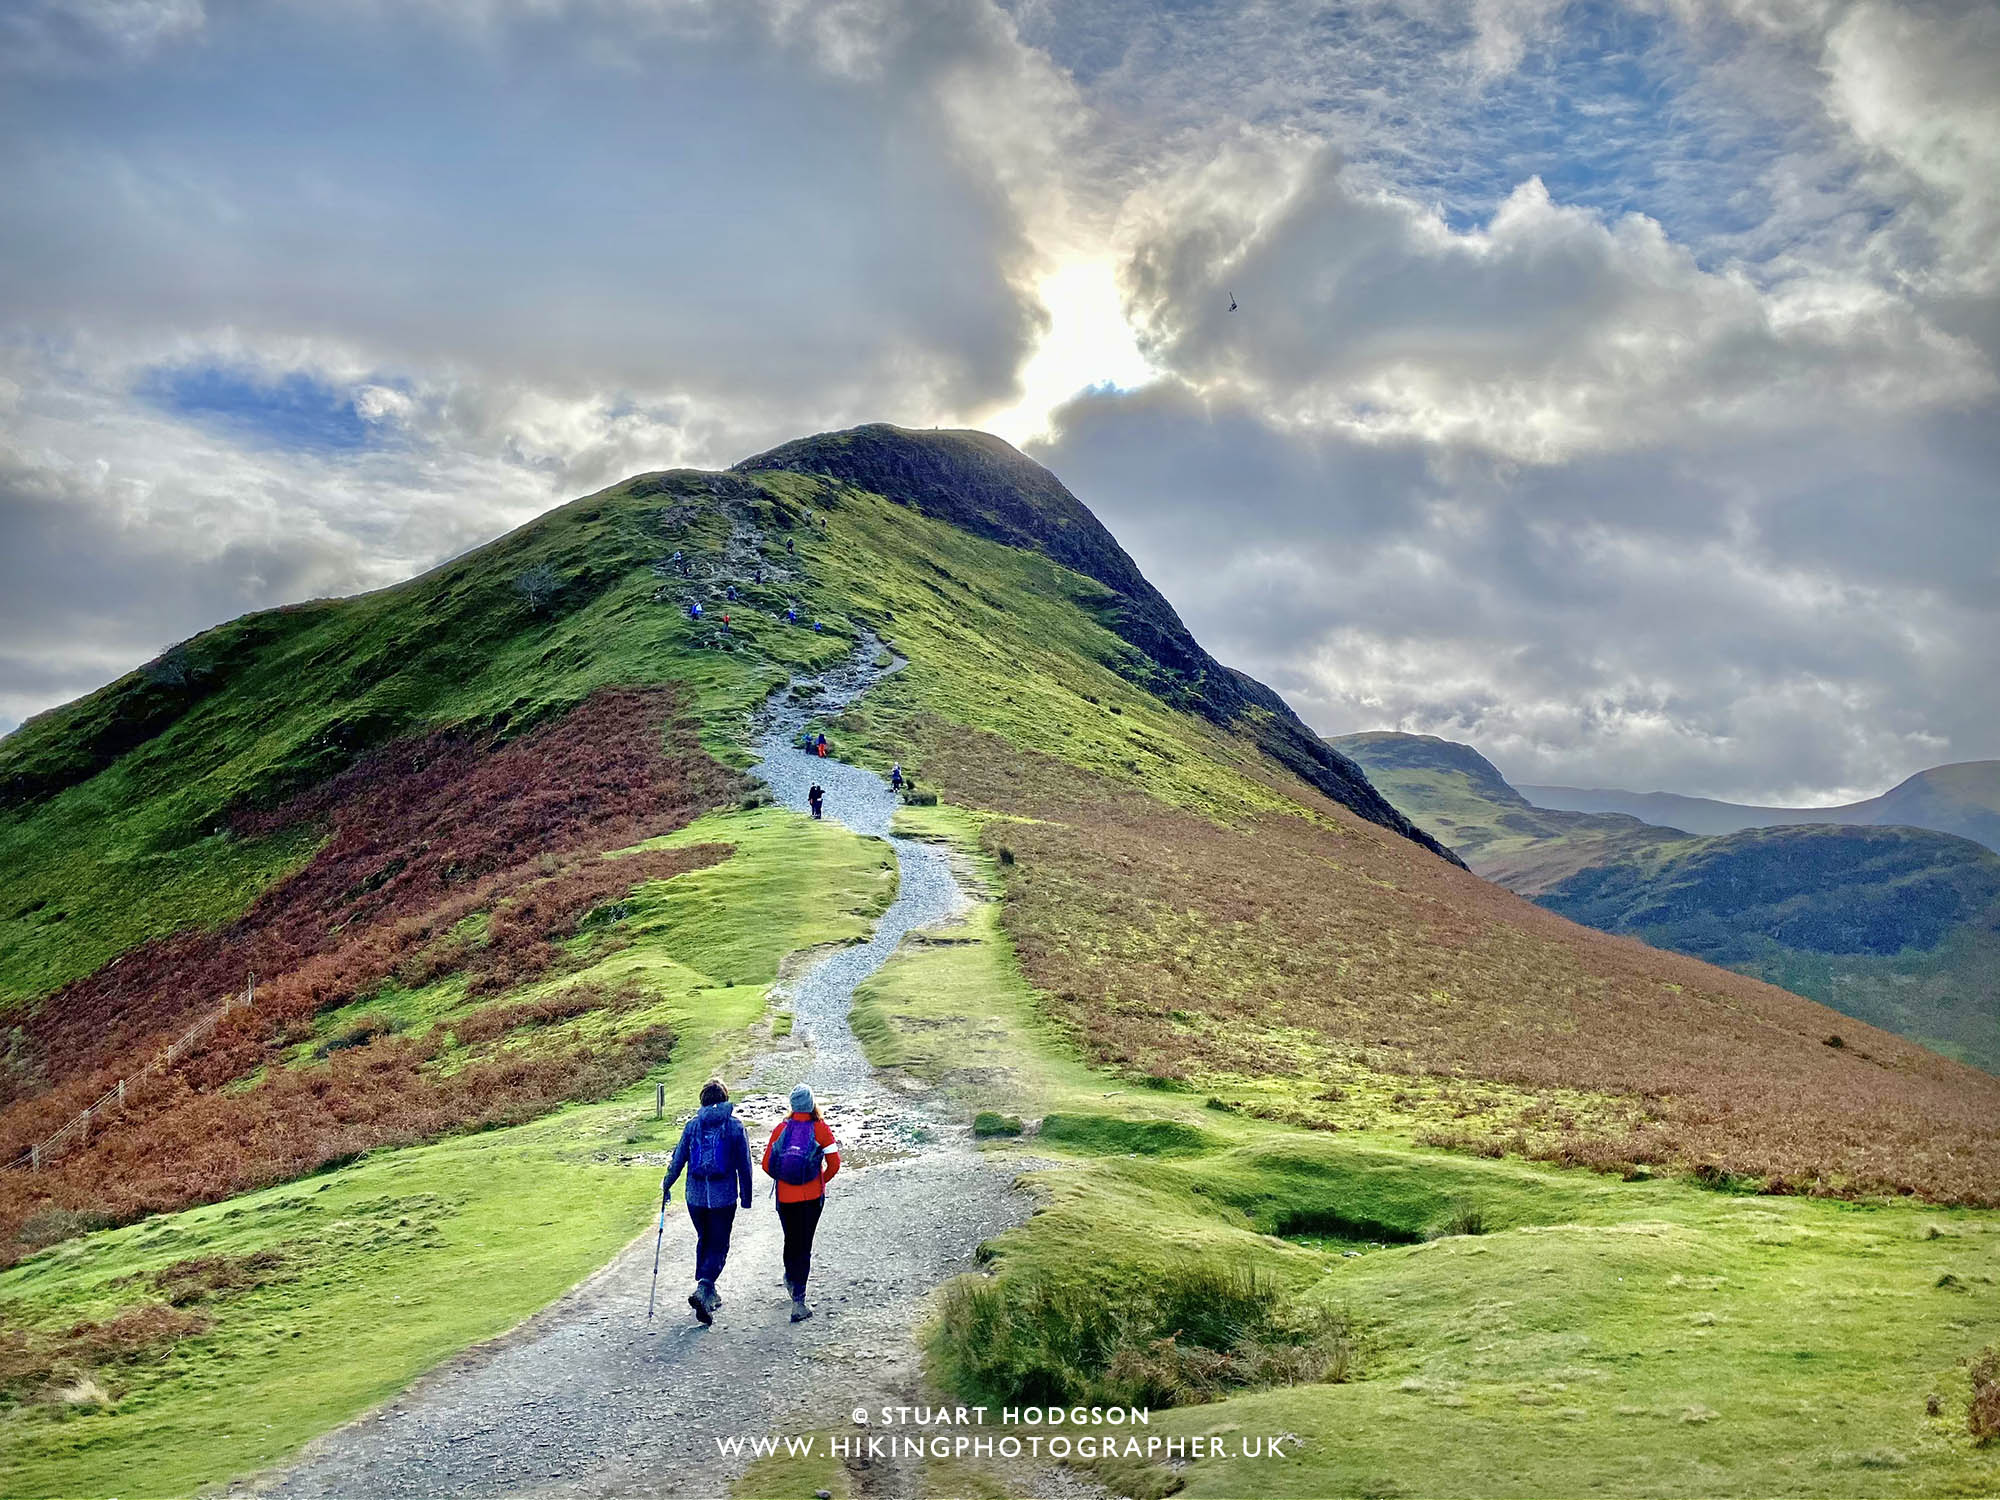 Recommended walking gear - Tips & Essential checklist on making